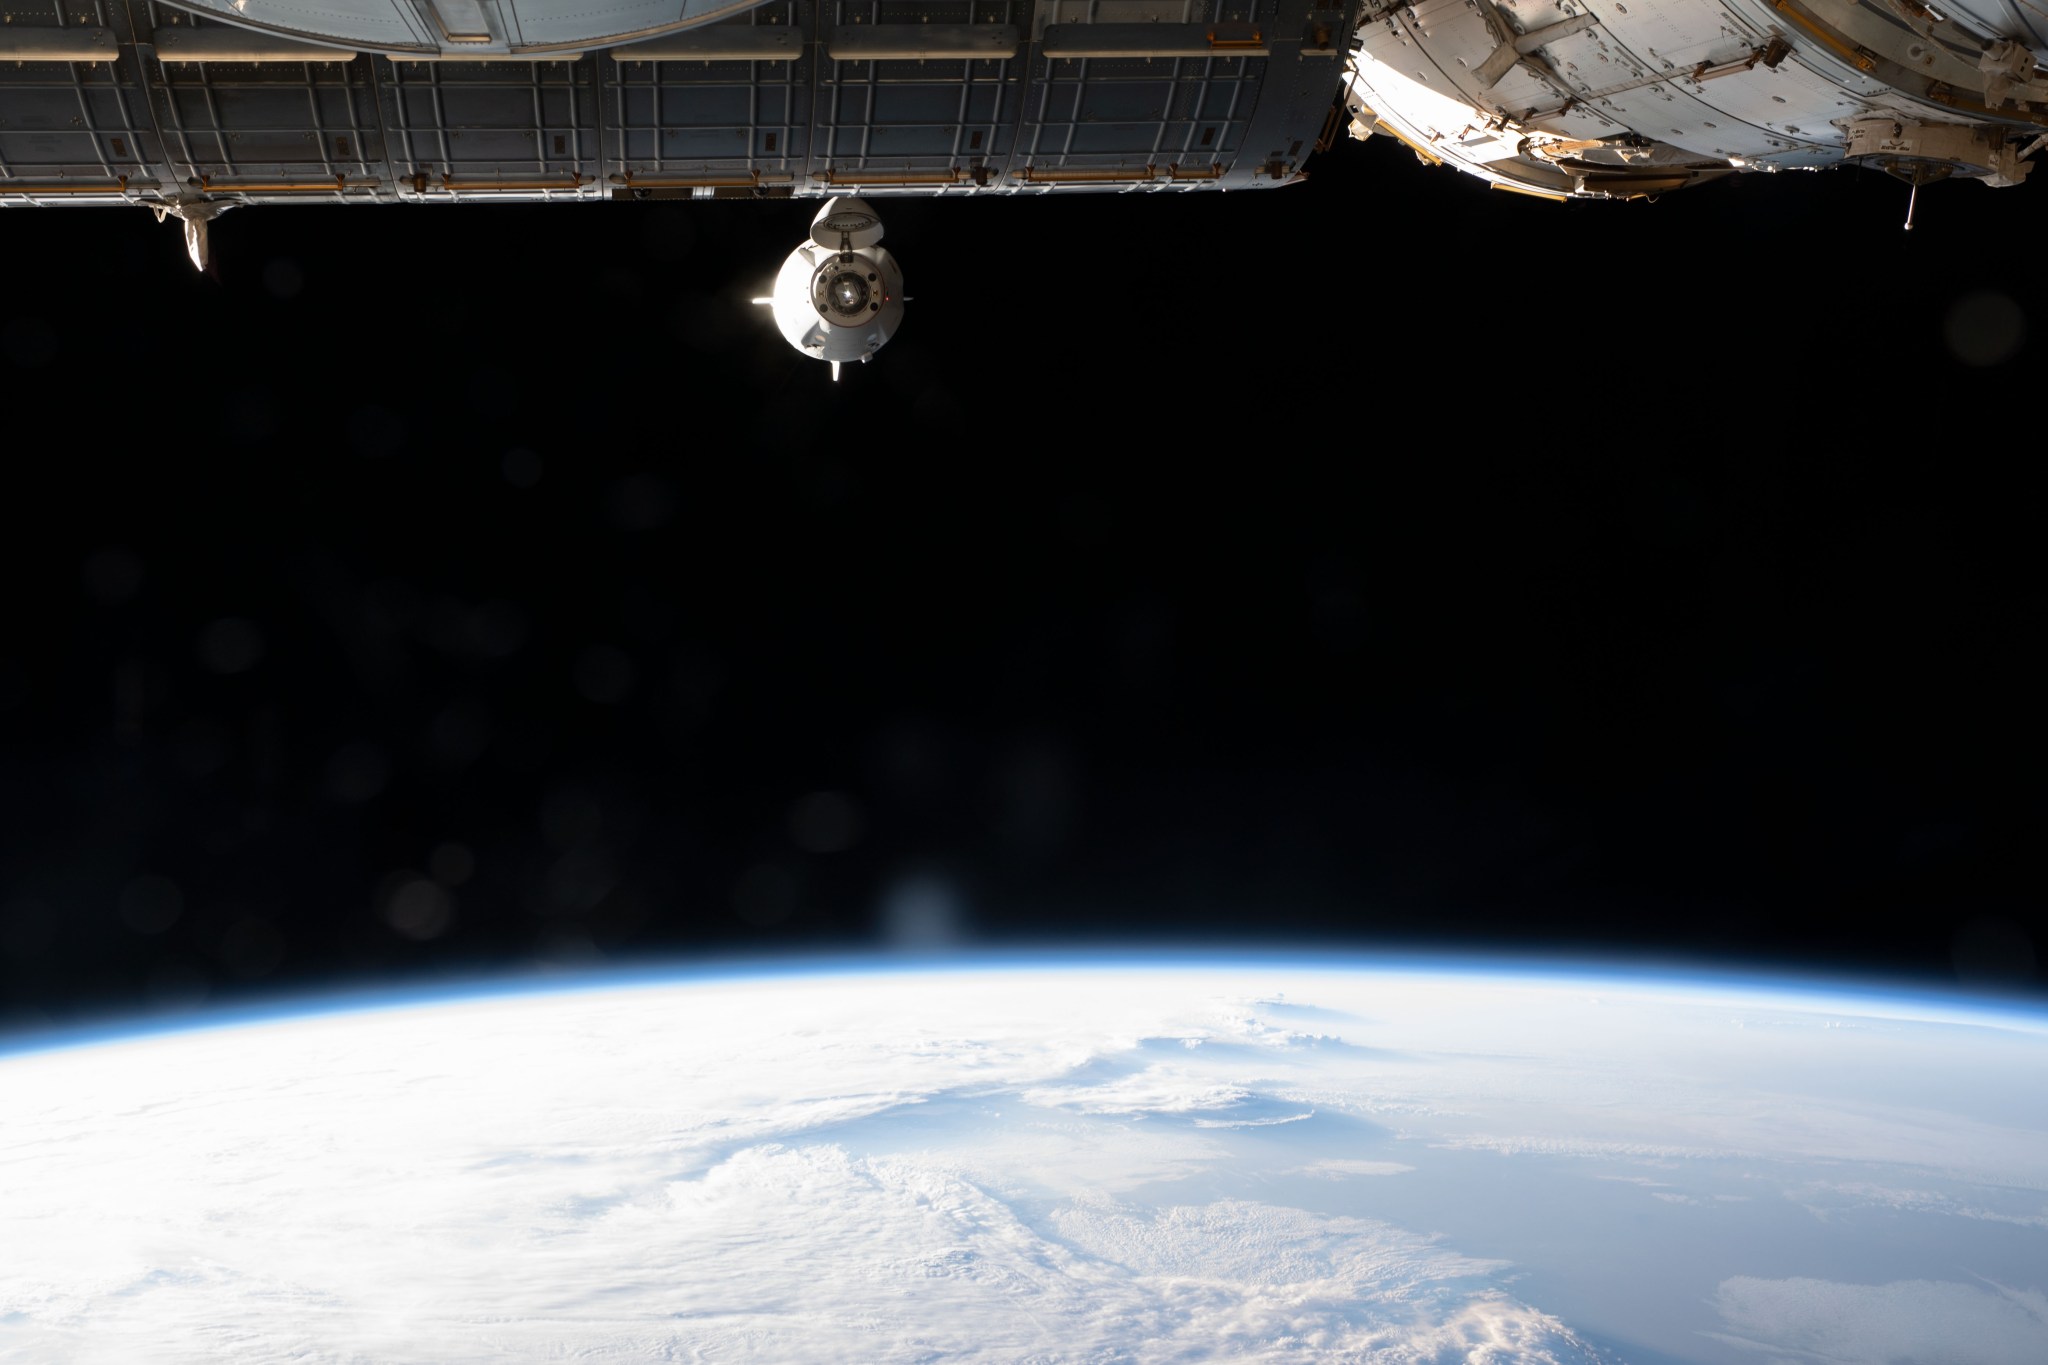 The SpaceX Crew Dragon Endeavour during a relocation maneuver as the International Space Station orbits 265 miles above the U.S-Canadian border.